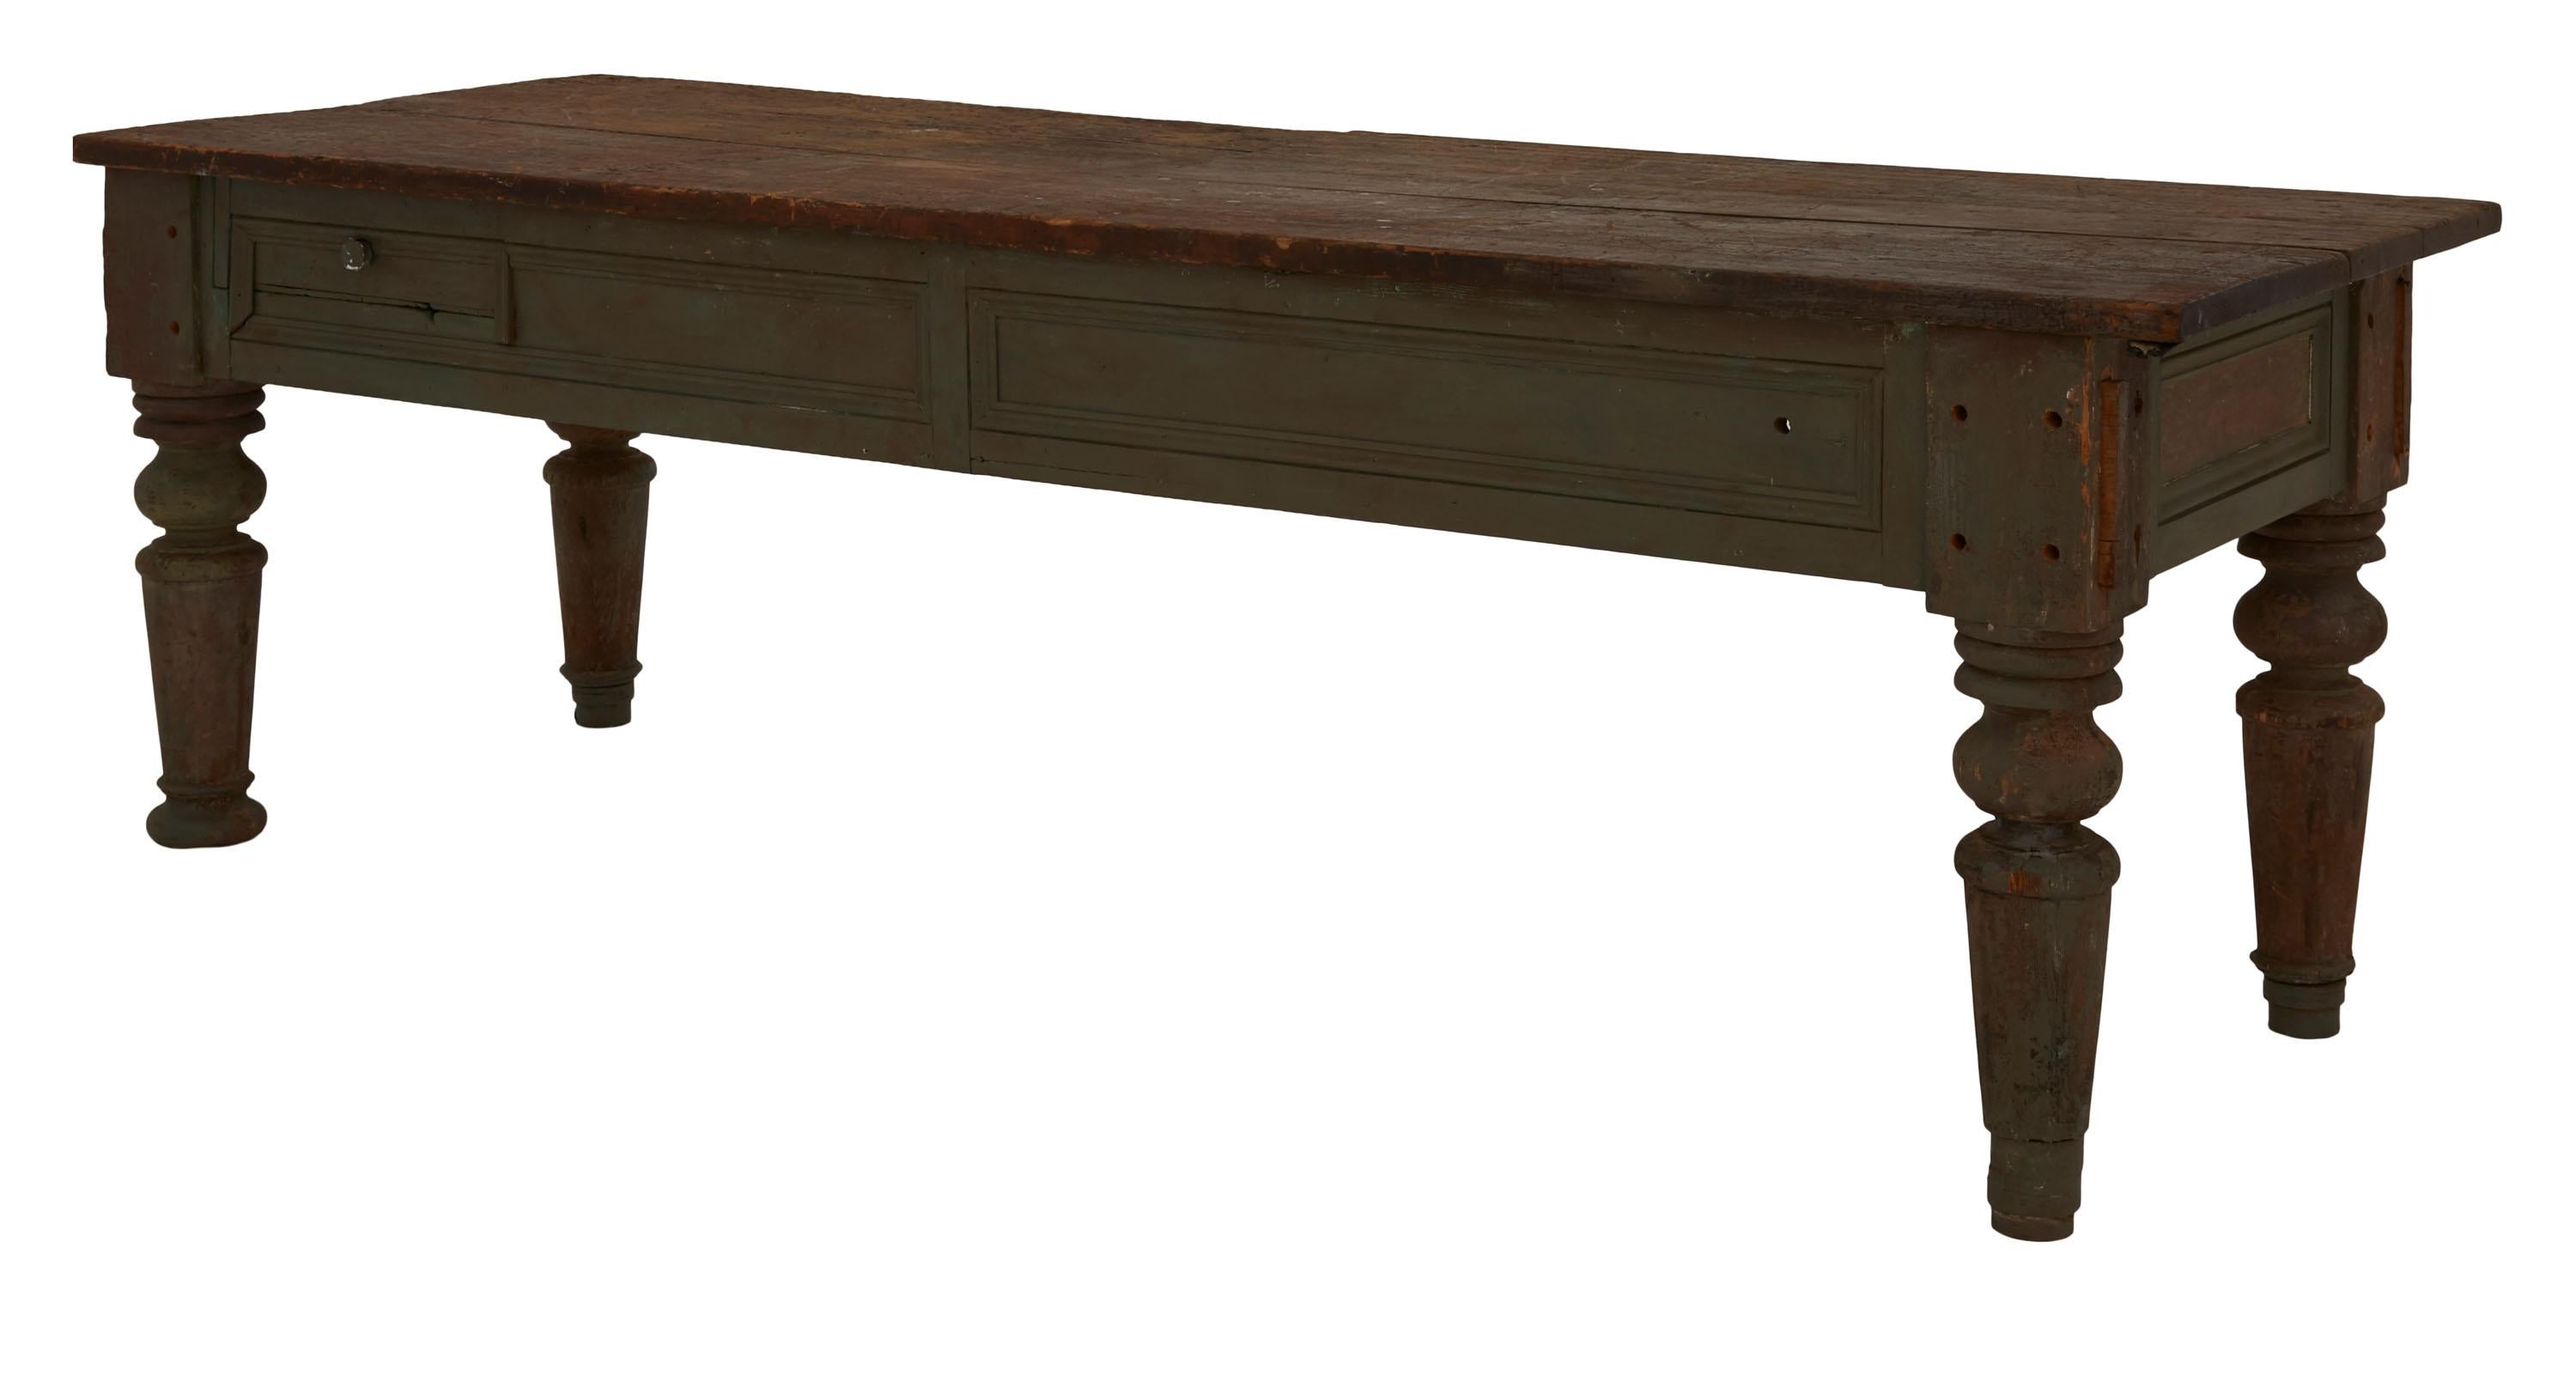 Rustic Late 19th Century Painted Wood Farm Table For Sale